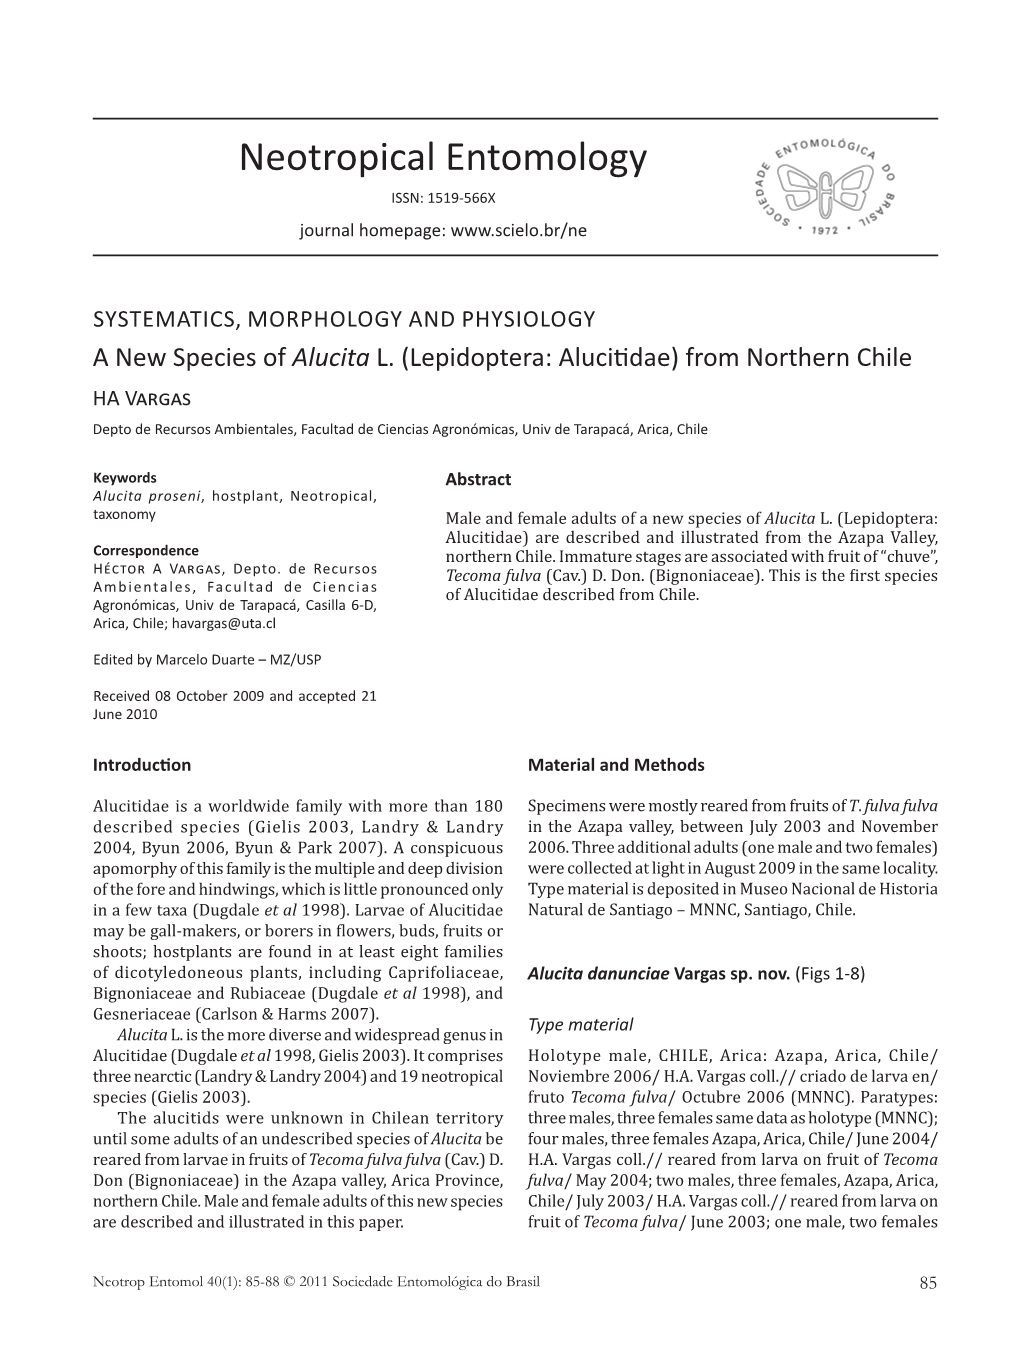 A New Species of Alucita L.(Lepidoptera: Alucitidae) From